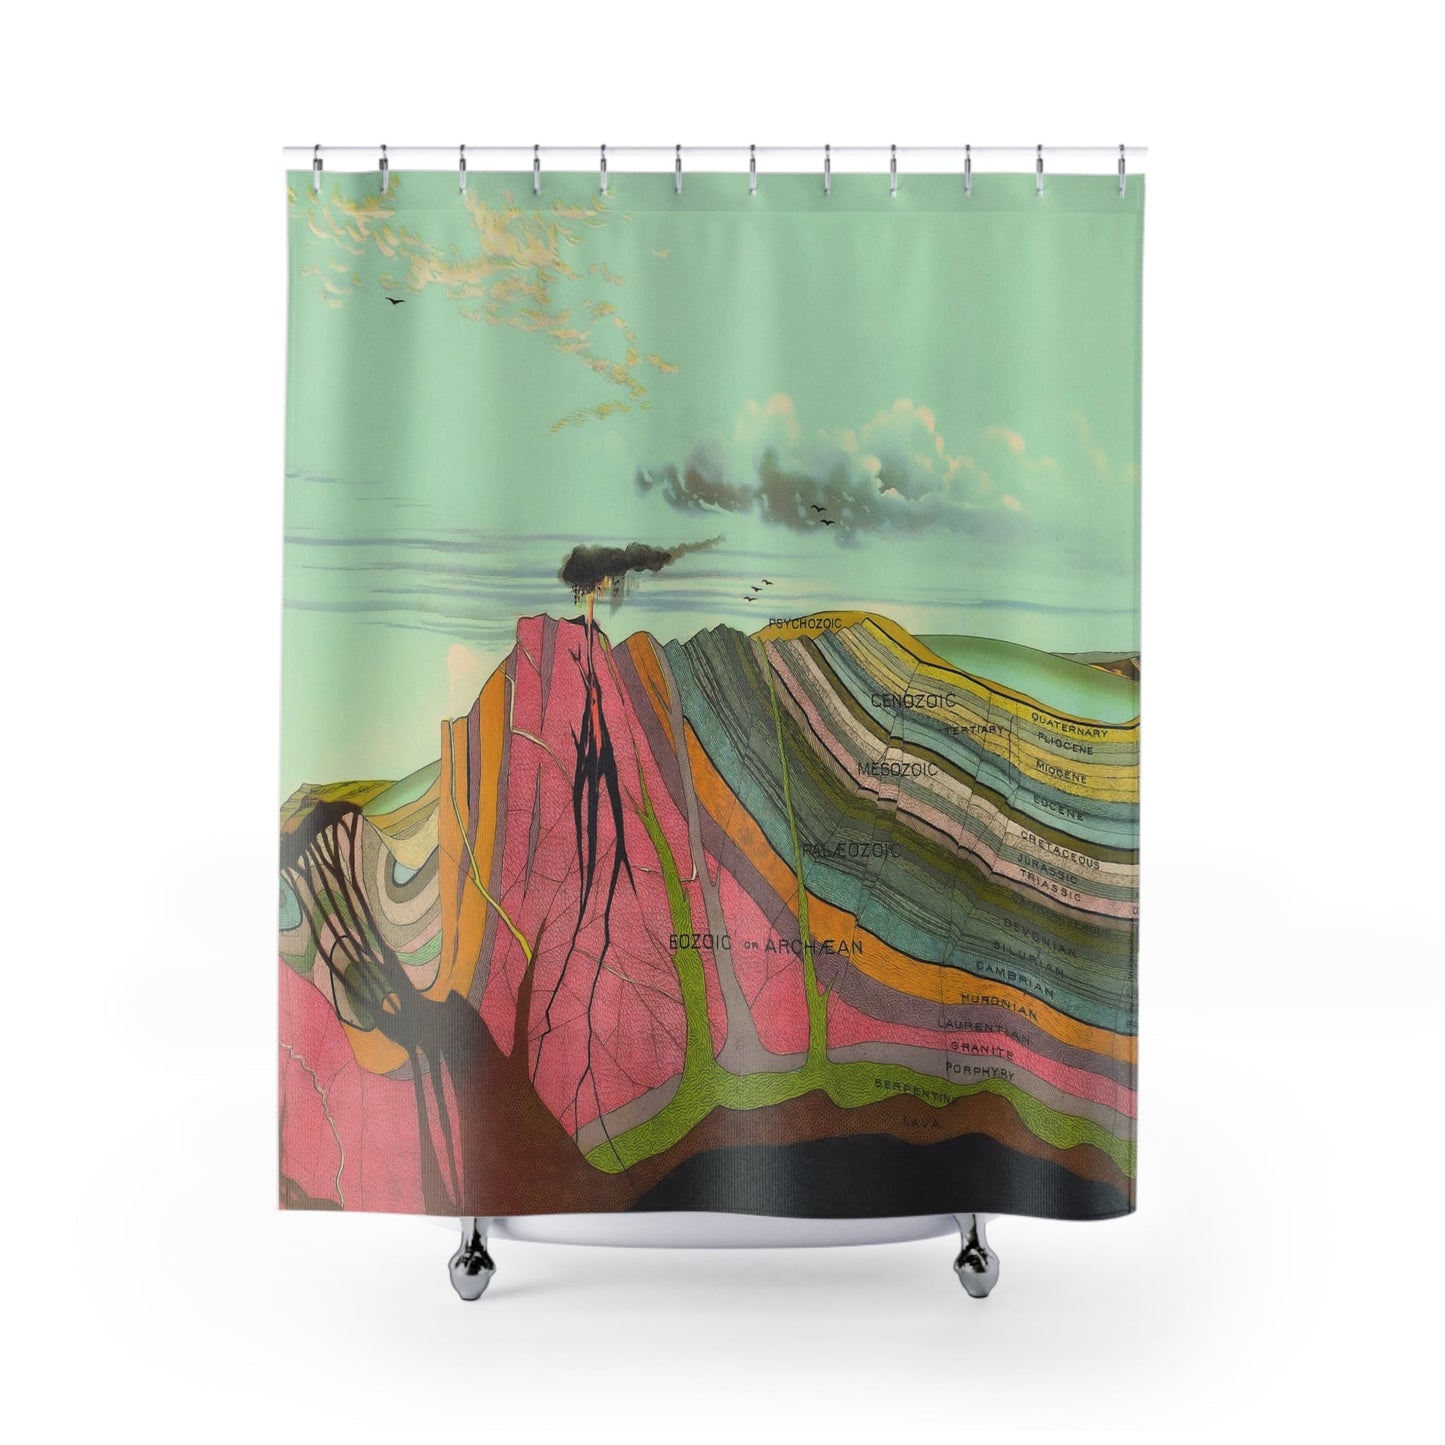 Layers of the Earth Shower Curtain with scientific design, educational bathroom decor showcasing geological strata.